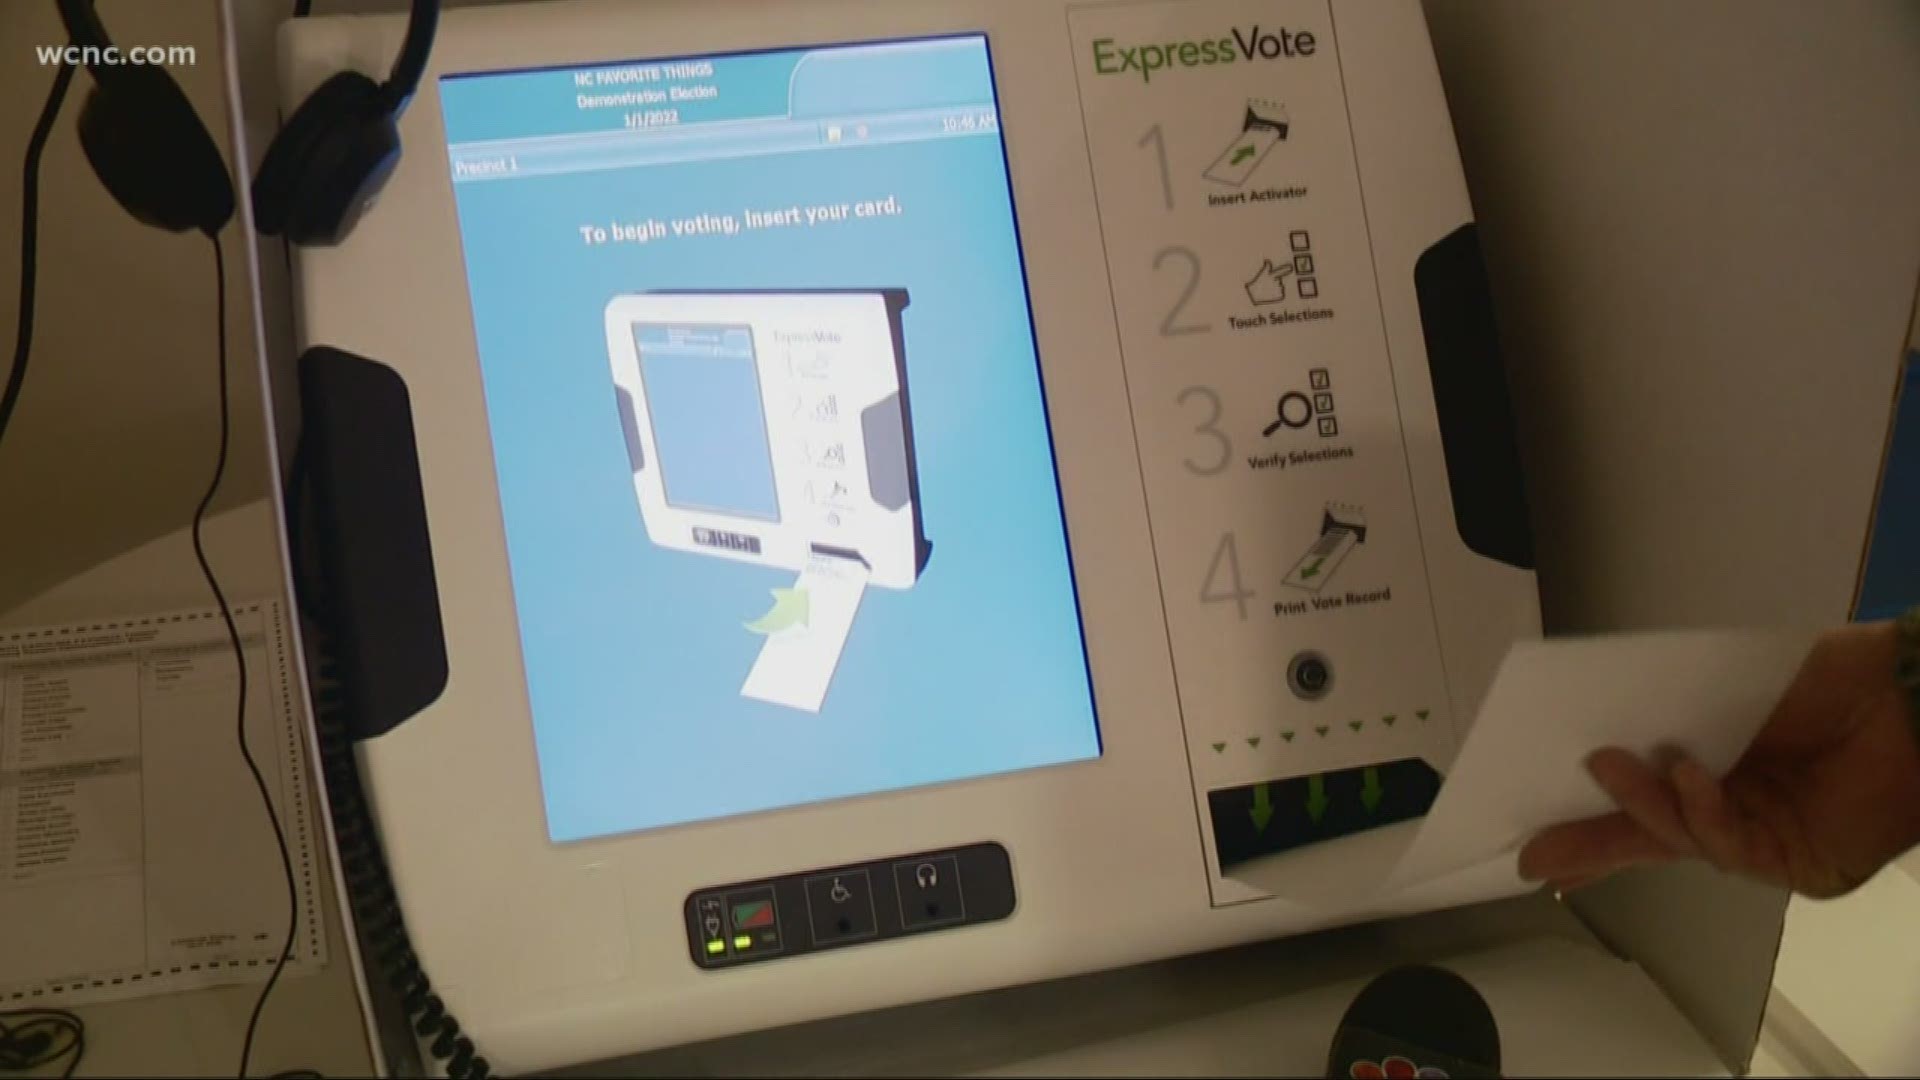 Mecklenburg County will likely use these voting machines in next year's elections.